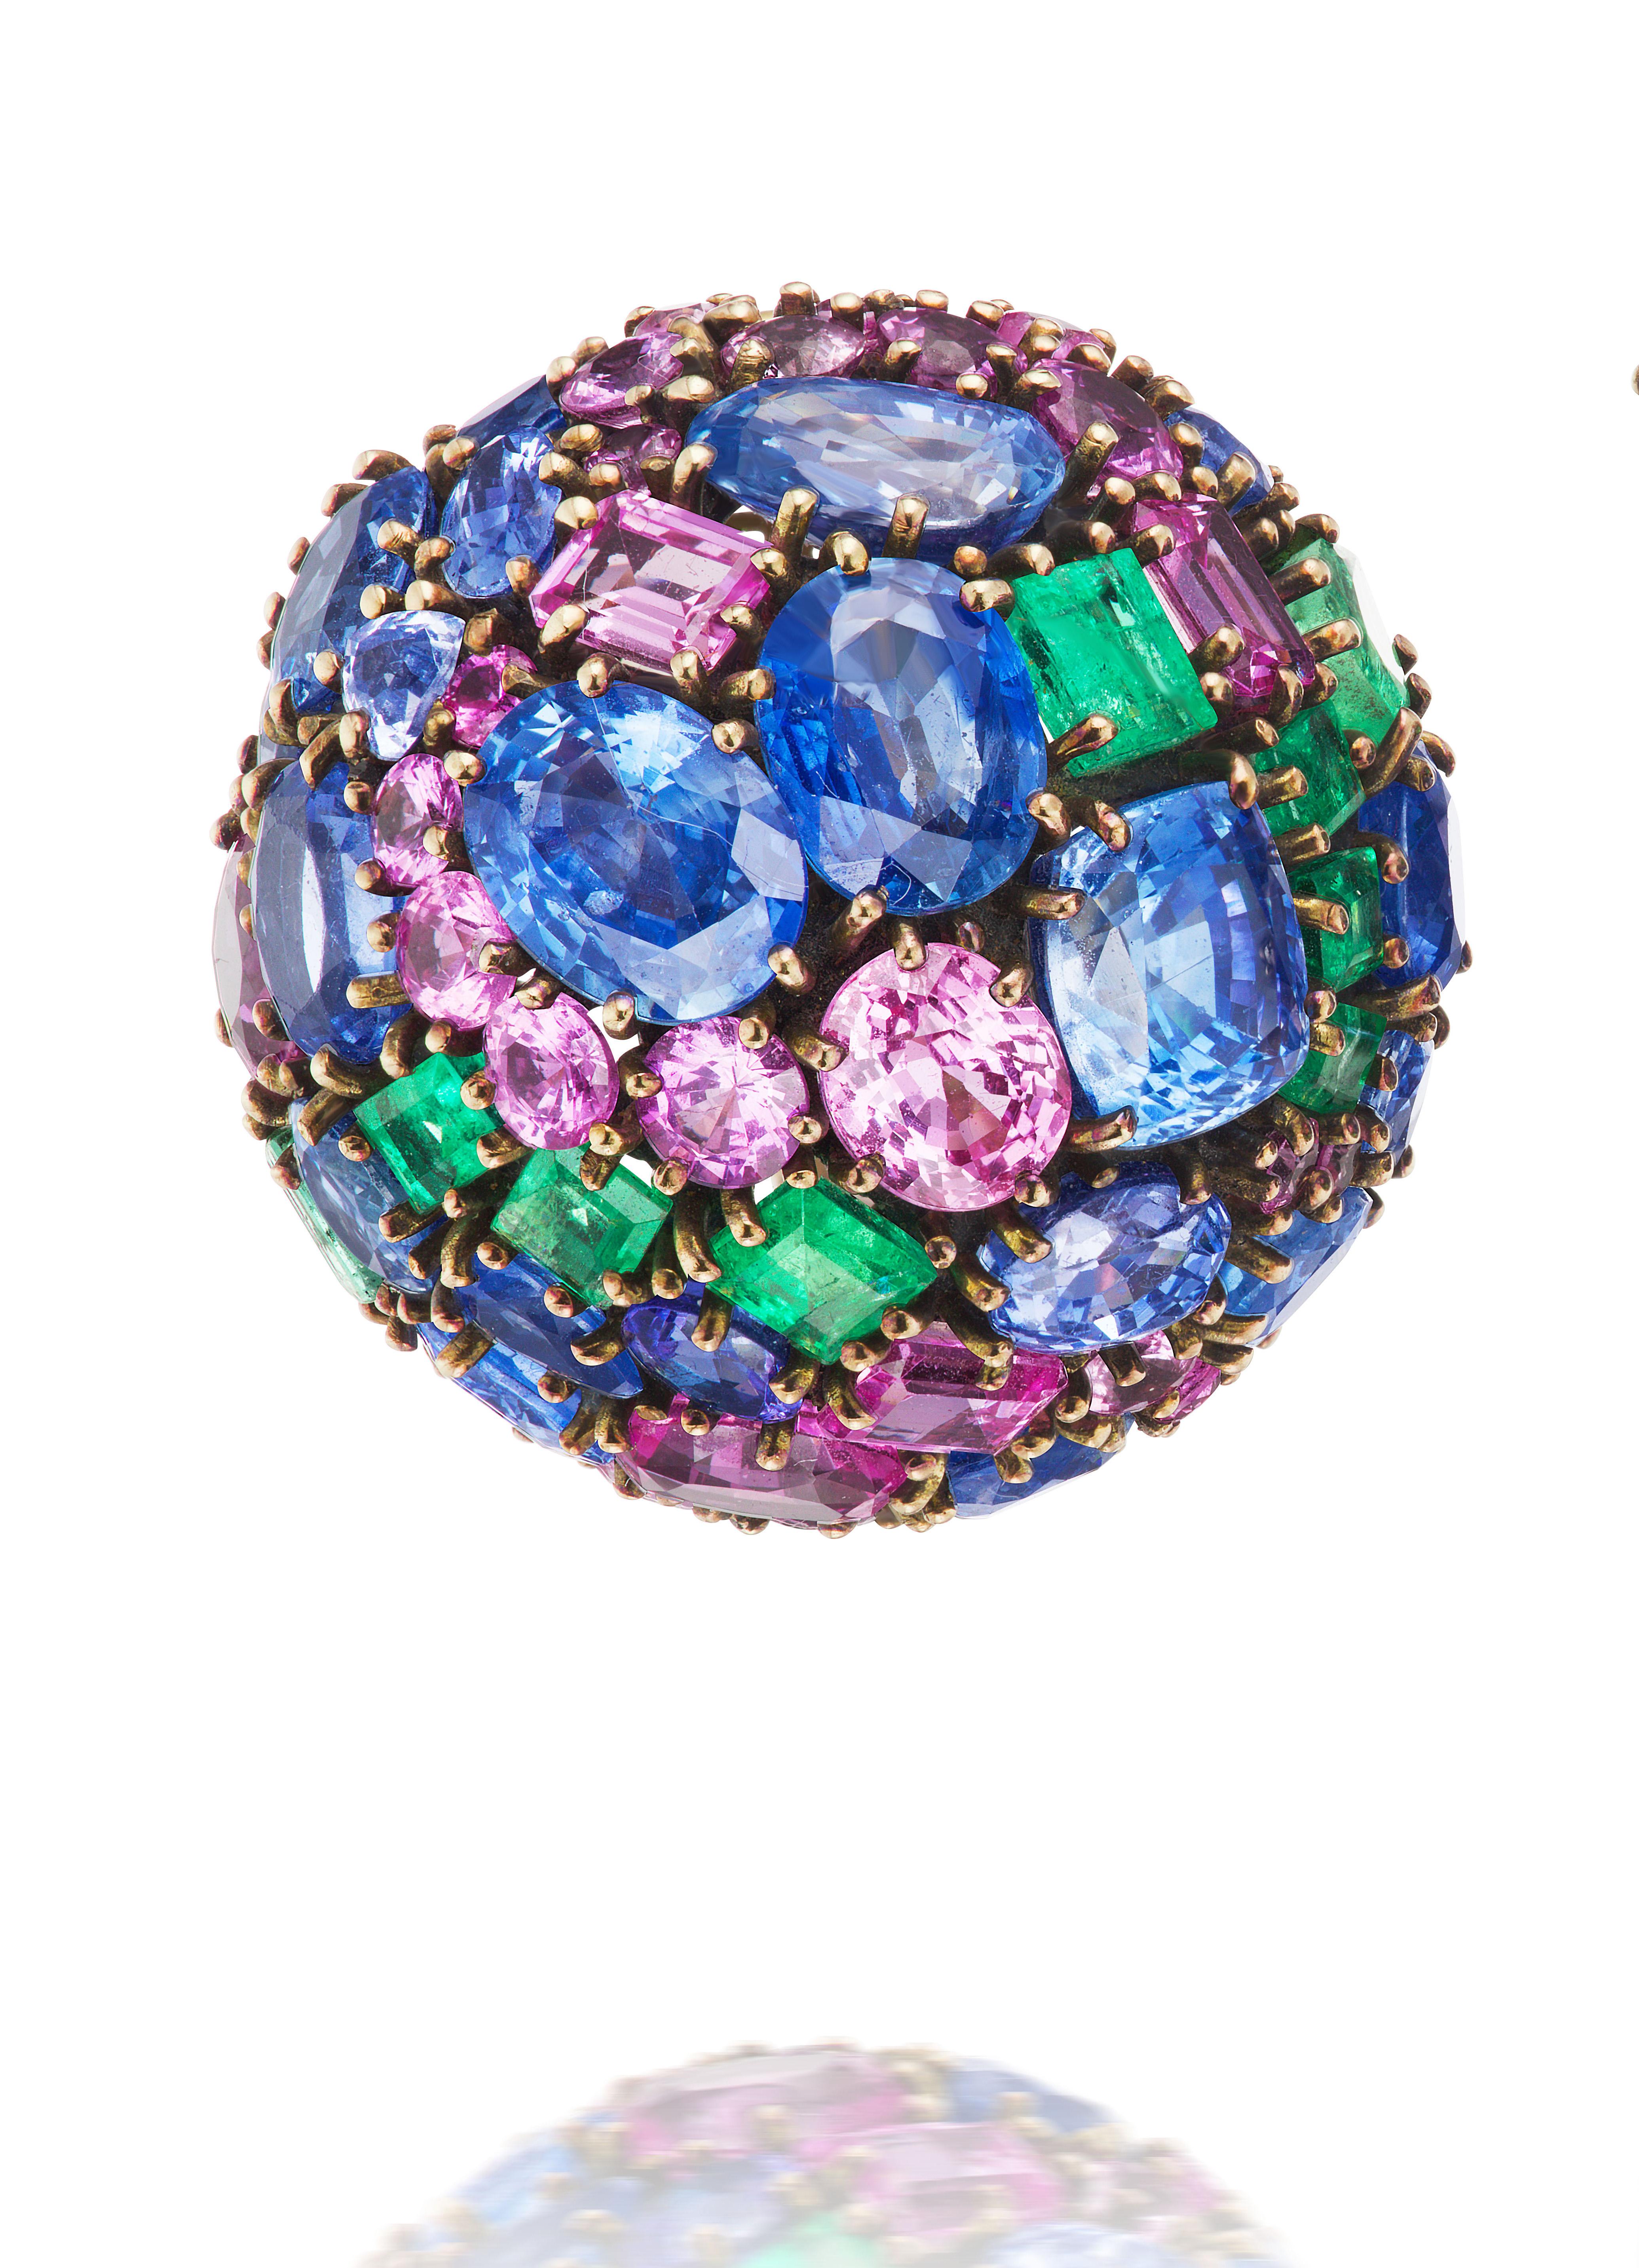 These substantial multi-gem bombé earclips by Marilyn Cooperman for Fred Leighton embody period charm with a wonderfully crafted whorl pattern in 18K gold and silver.

Sapphires weighing approximately 28.70 carats.
Emeralds weighing approximately